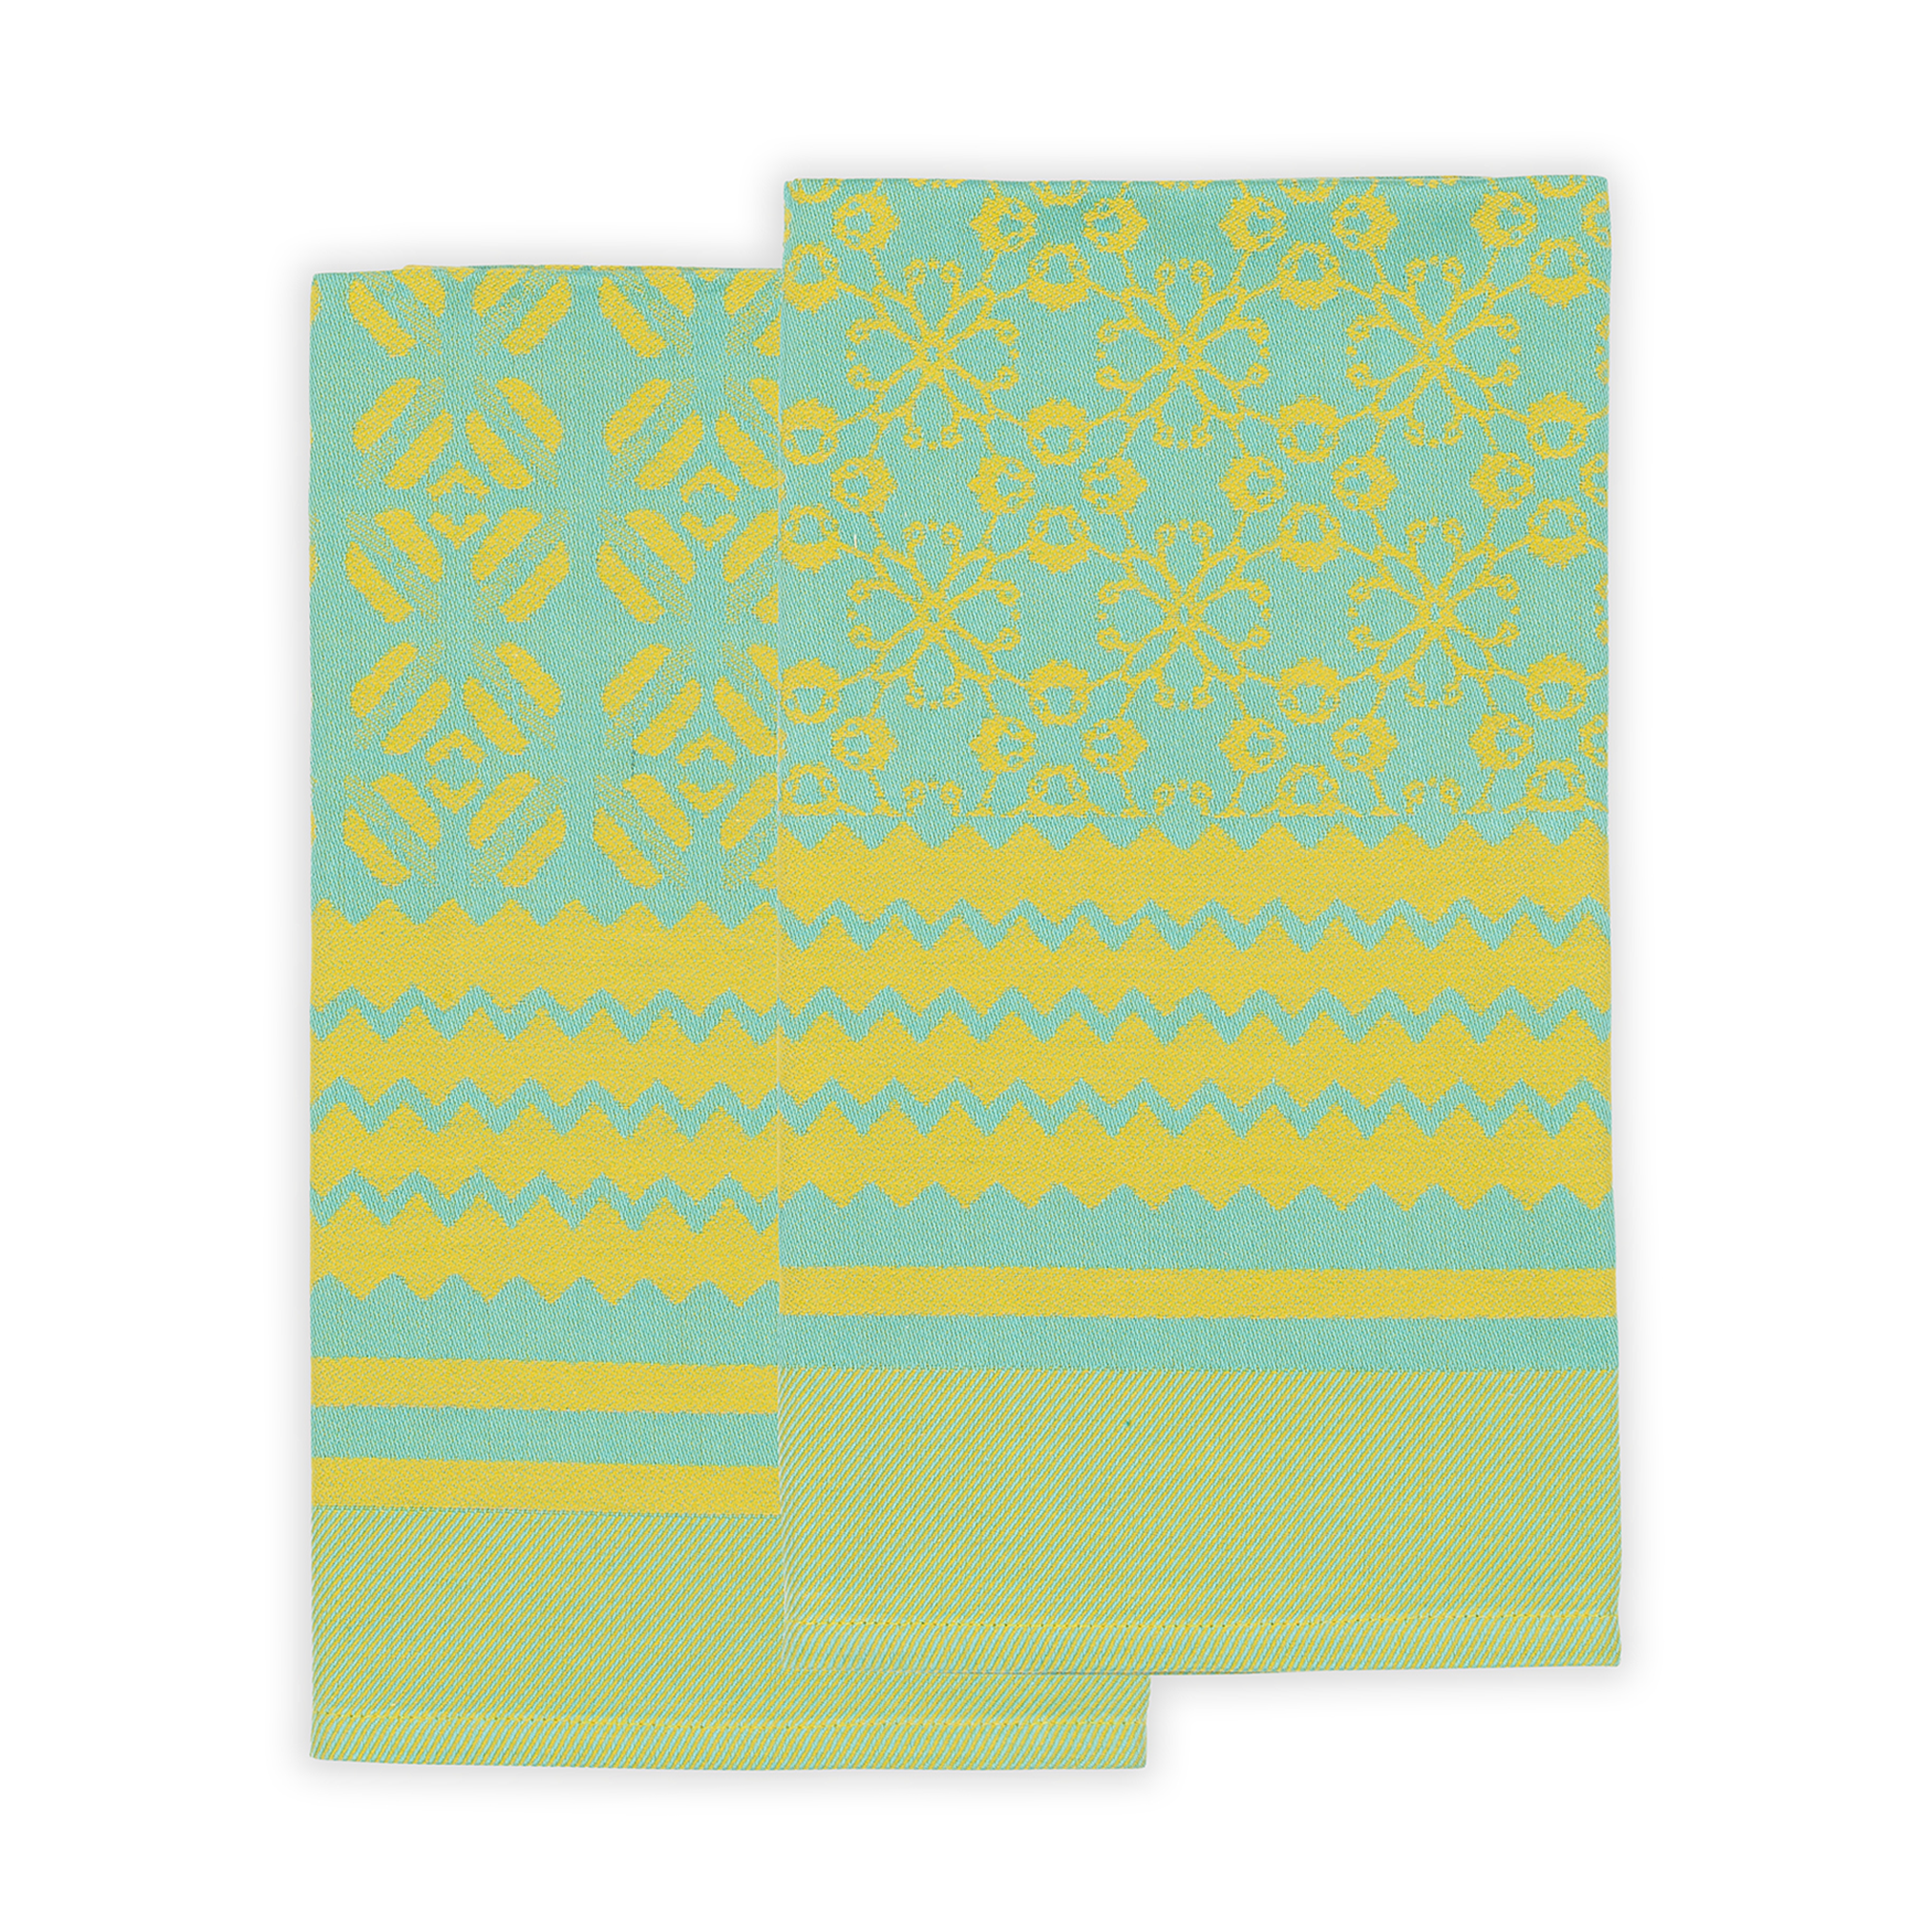 Unique tea towels inspired by Africa's rich culture, jacquard woven from 100% African cotton. Featuring diverse African patterns including floral designs in yellow and turquoise, these dish towels add vibrancy to your kitchen and intrigue guests.